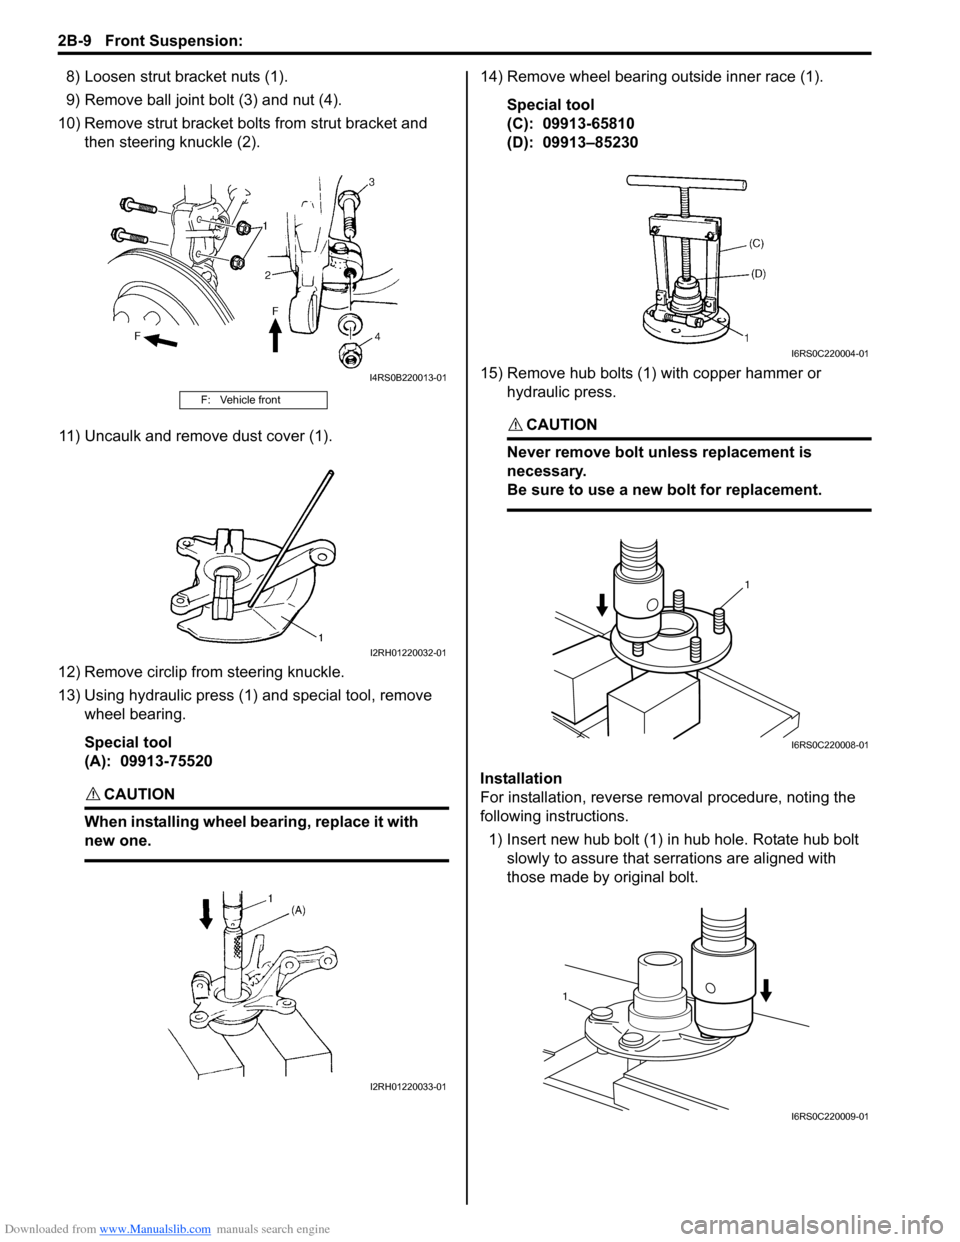 SUZUKI SWIFT 2006 2.G Service Workshop Manual Downloaded from www.Manualslib.com manuals search engine 2B-9 Front Suspension: 
8) Loosen strut bracket nuts (1).
9) Remove ball joint bolt (3) and nut (4).
10) Remove strut bracket bolt s from strut